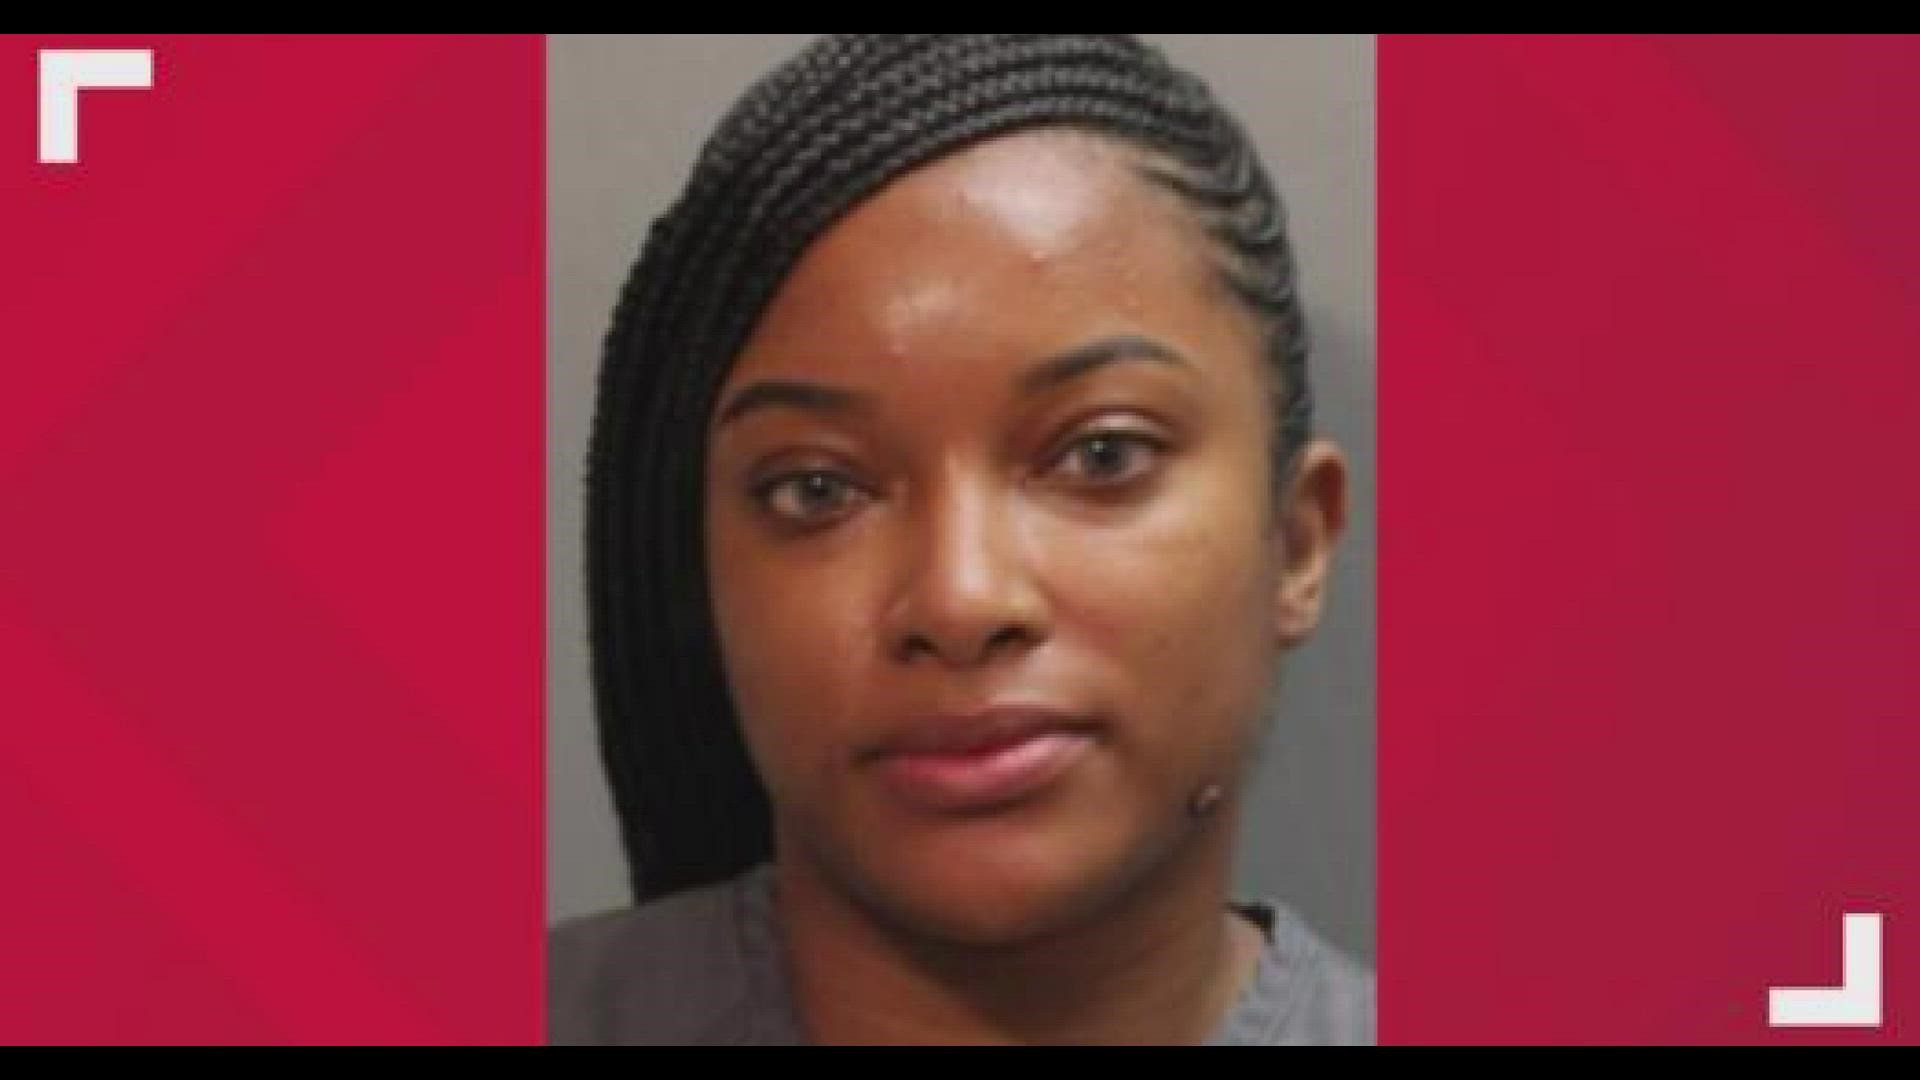 The nurse assaulted her manager after asking him to "stop talking to her," police said.